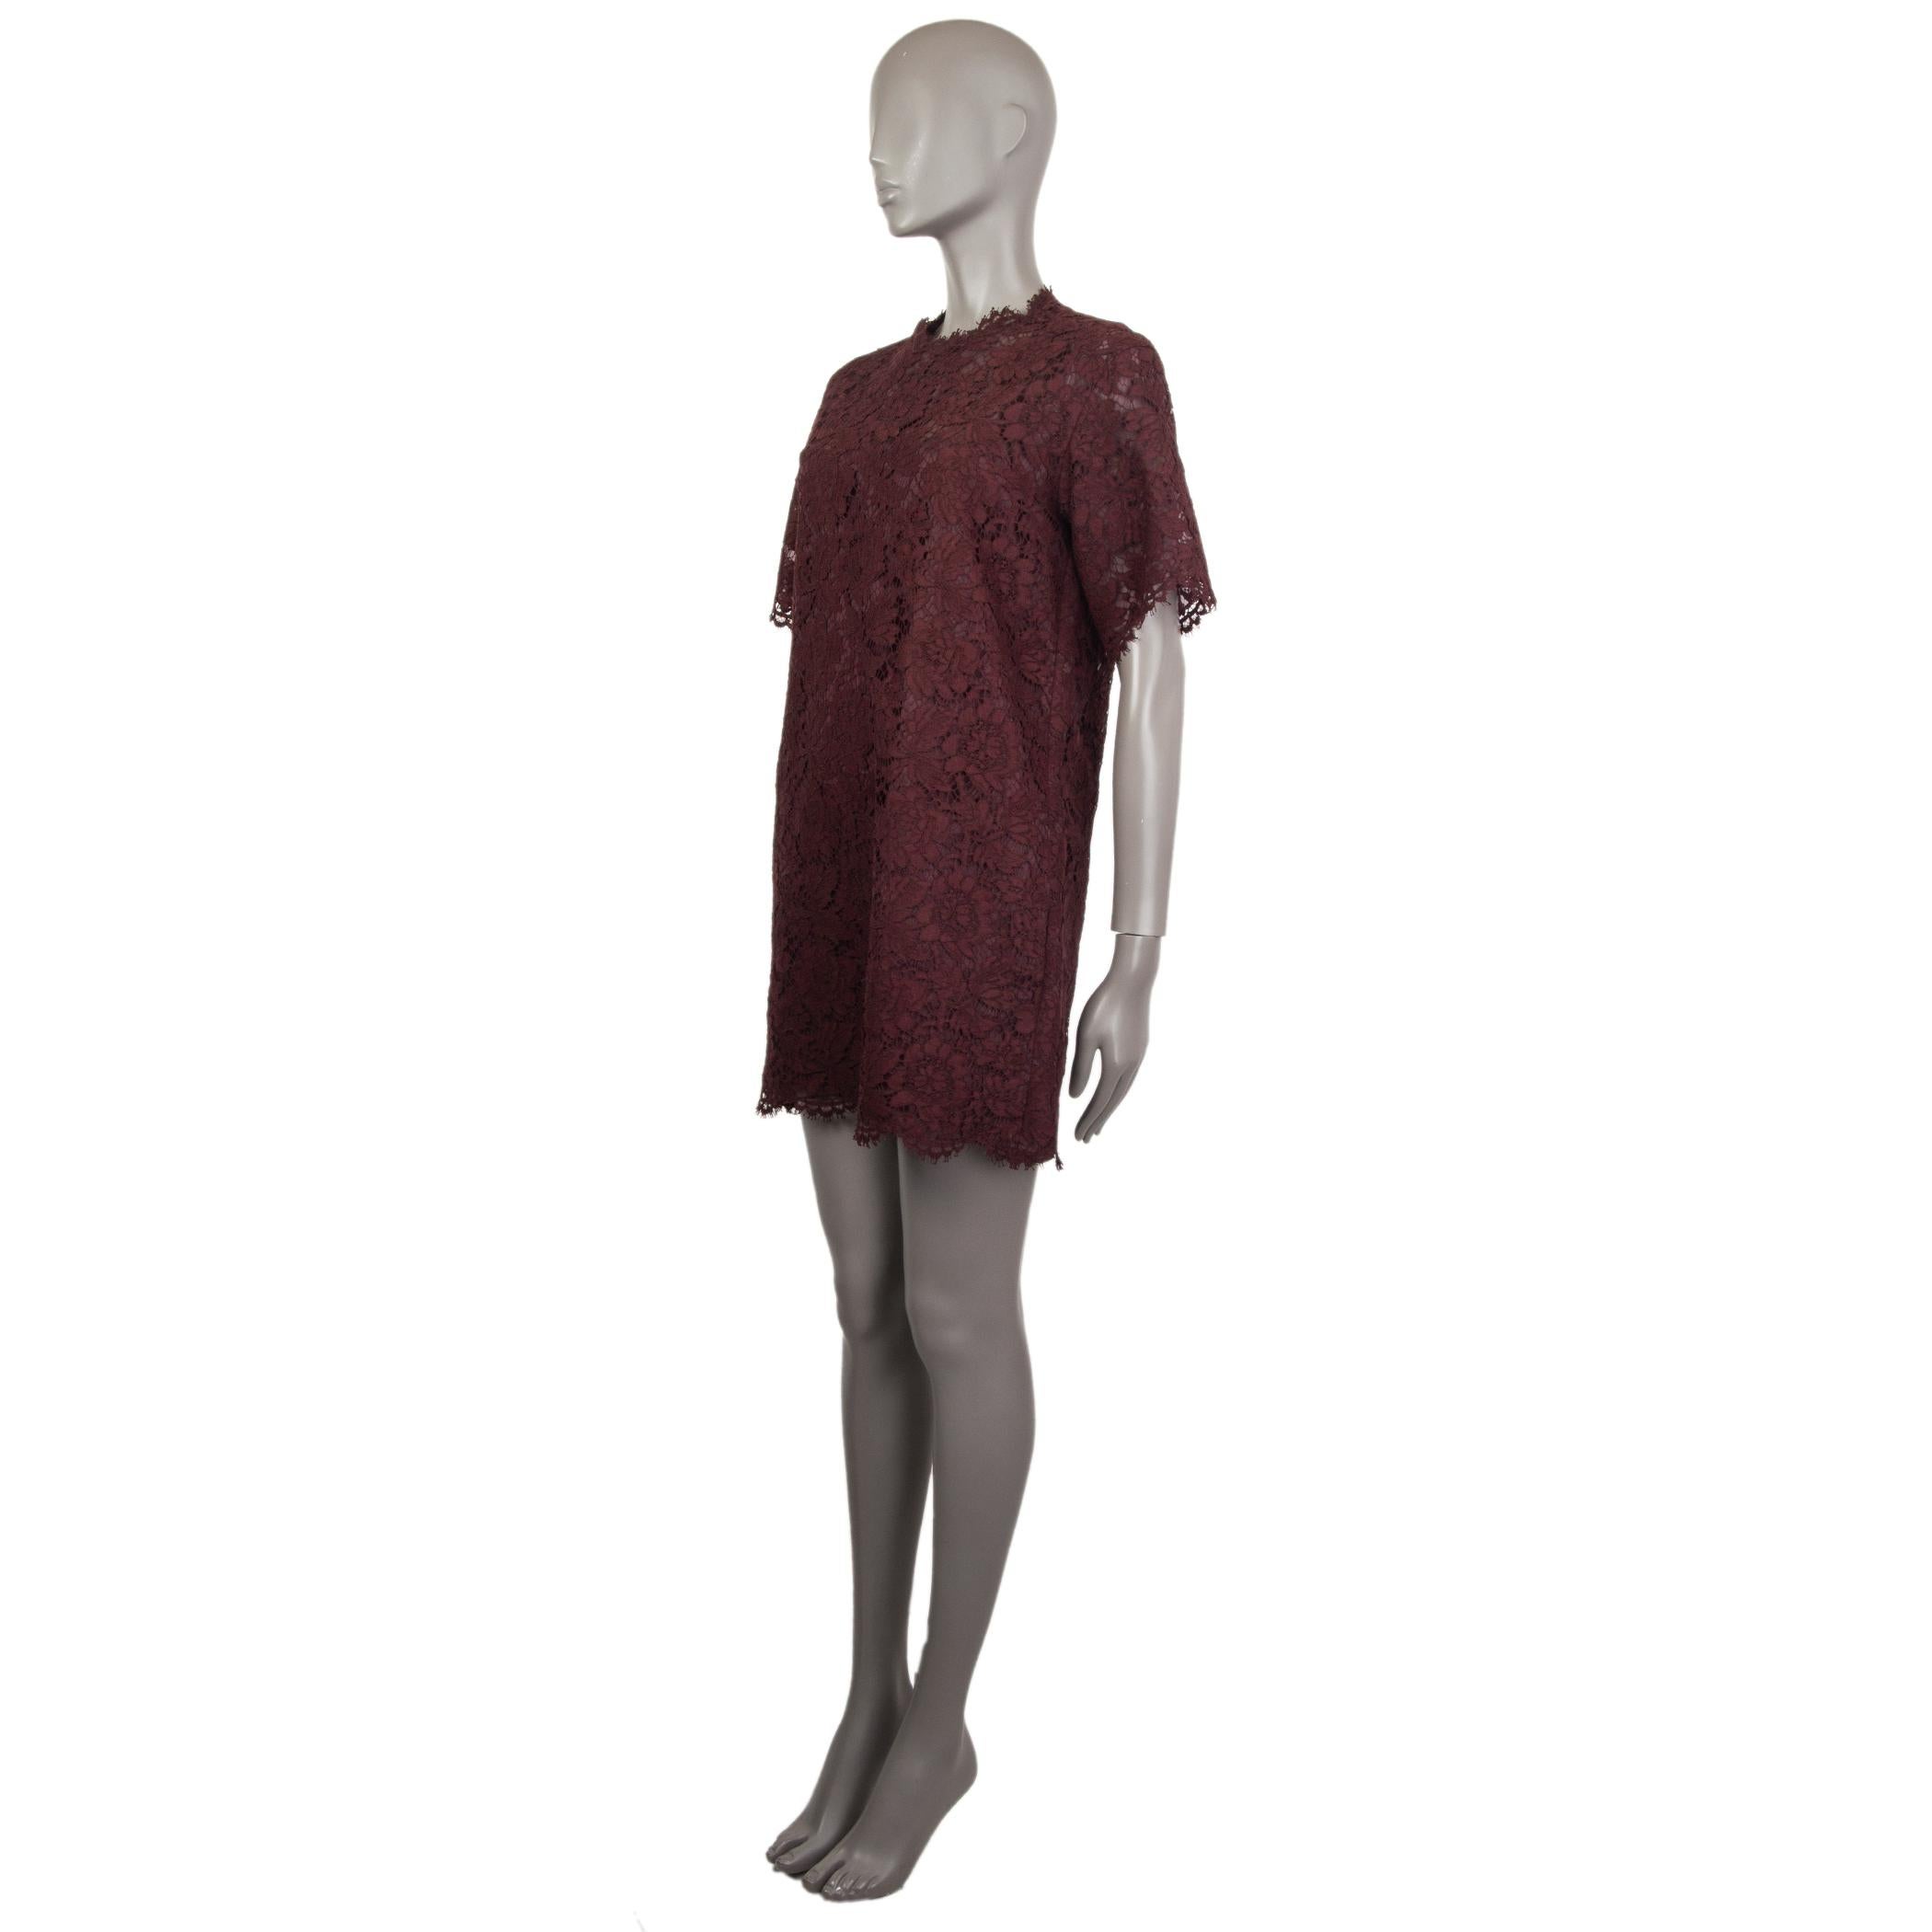 Valentino lace shift dress in burgundy cotton (77%), viscose (17%), and polyamide (6%) with short sleeves and two pockets on the front. Closes with a button and loop on the back. Lined in burgundy silk (91%) and elastane (9%). Comes with a burgundy